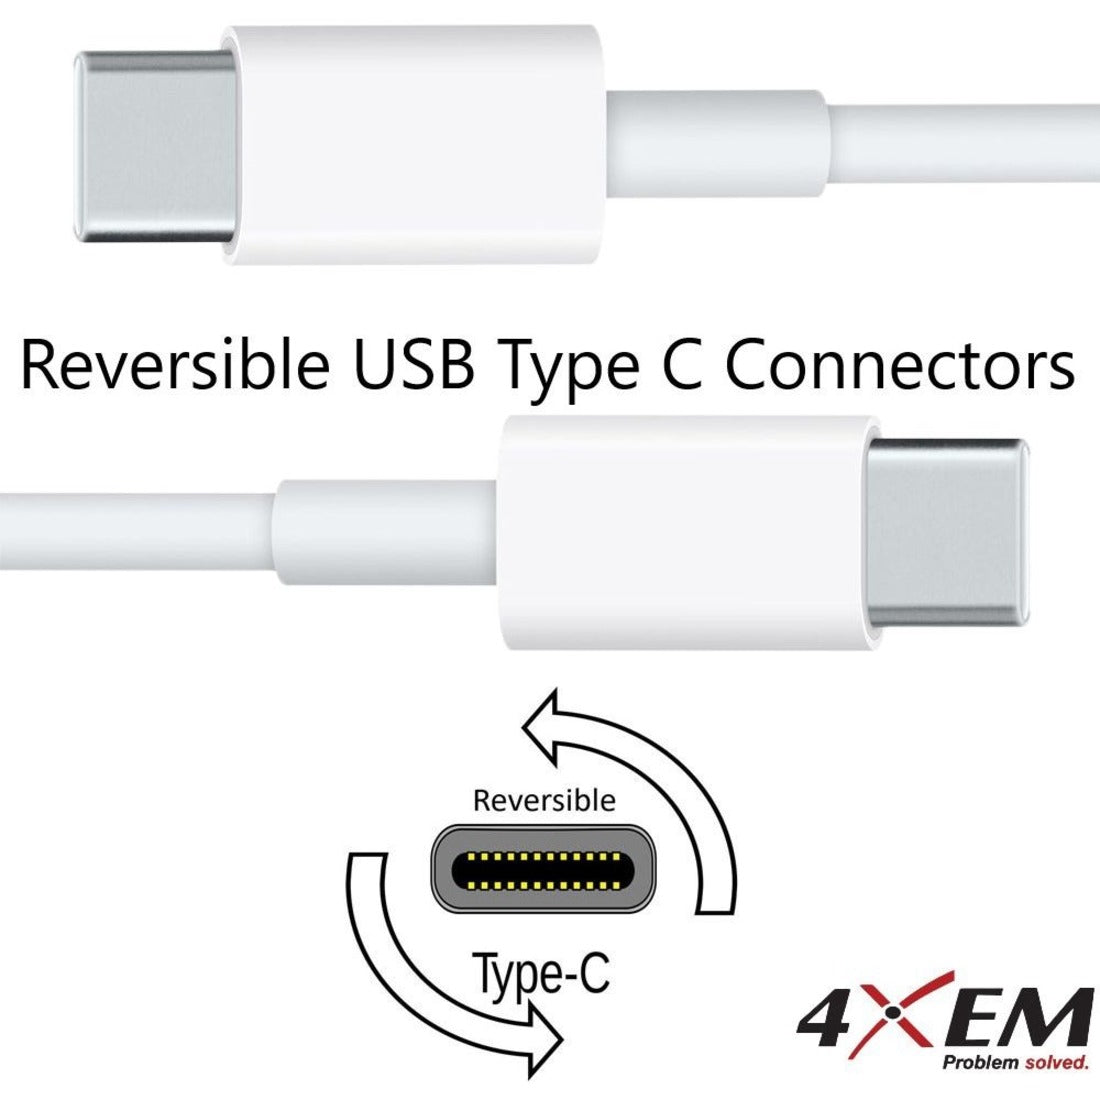 4XEM 4XUSBCC31G26W 6FT/2M USB-C To USB-C Cable M/M USB 3.1 Gen 2 10GBPS, Reversible, Charging, E-marker Chip, USB- Power Delivery (USB PD)